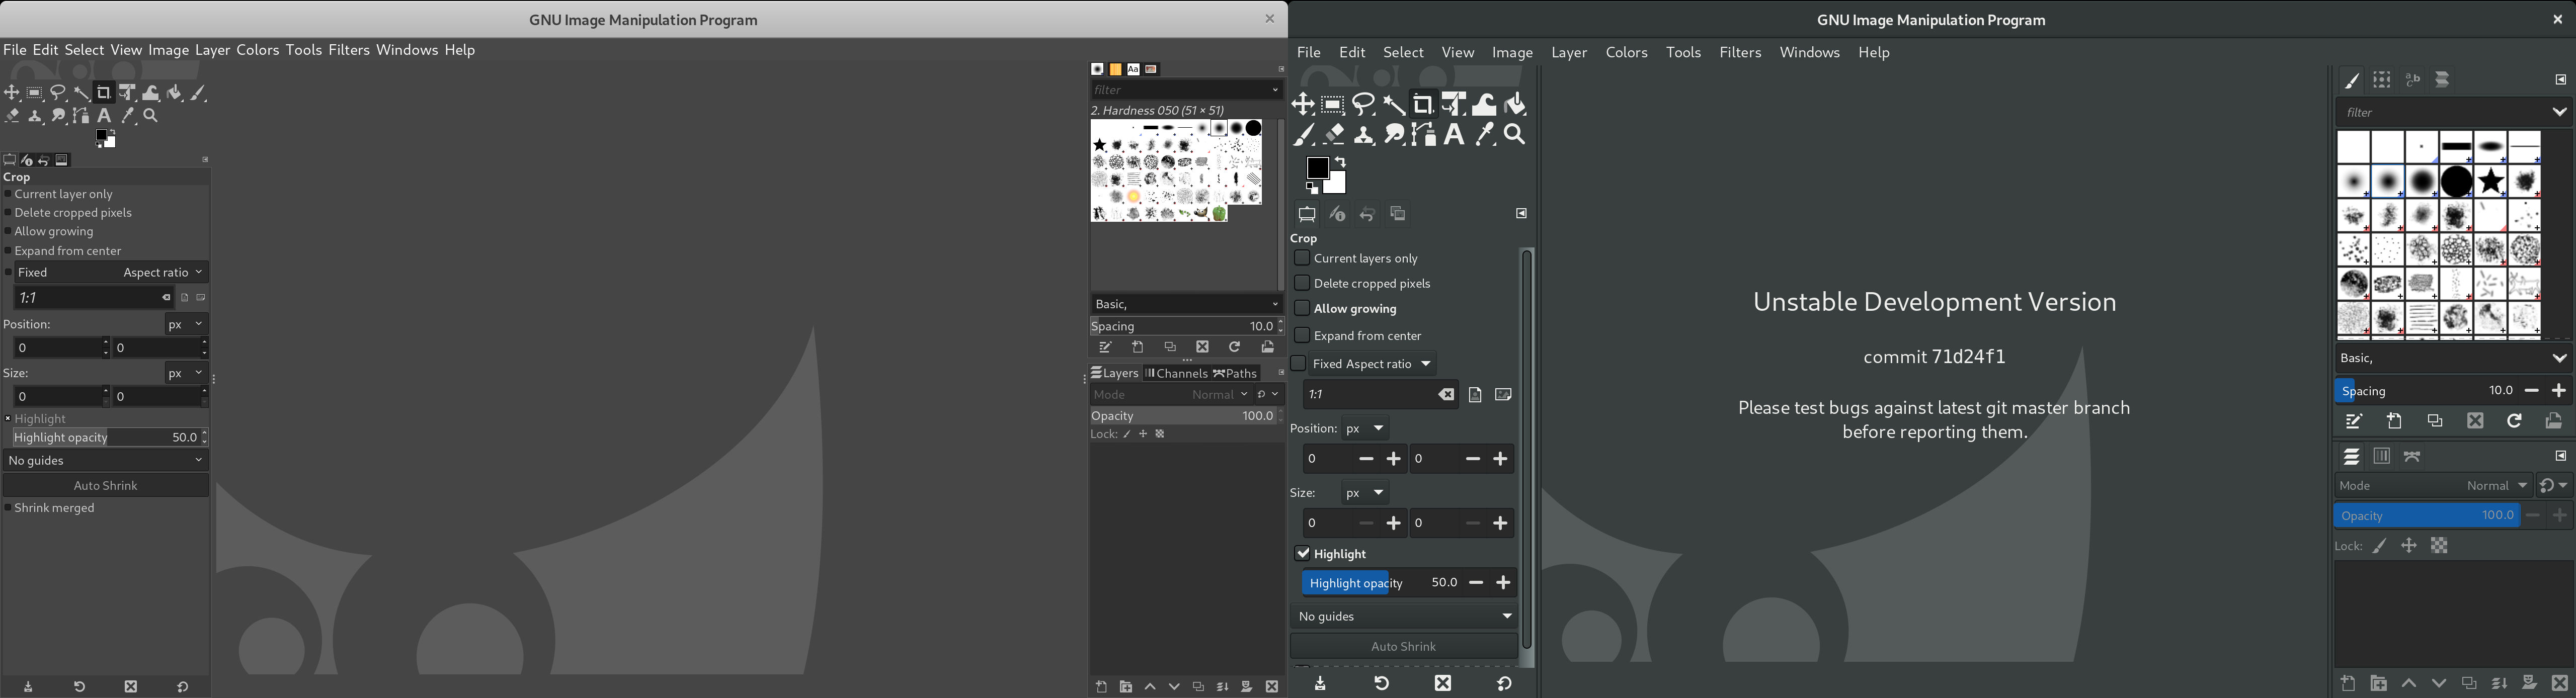 GIMP 2.10.22 and 2.99.2 interfaces side by side